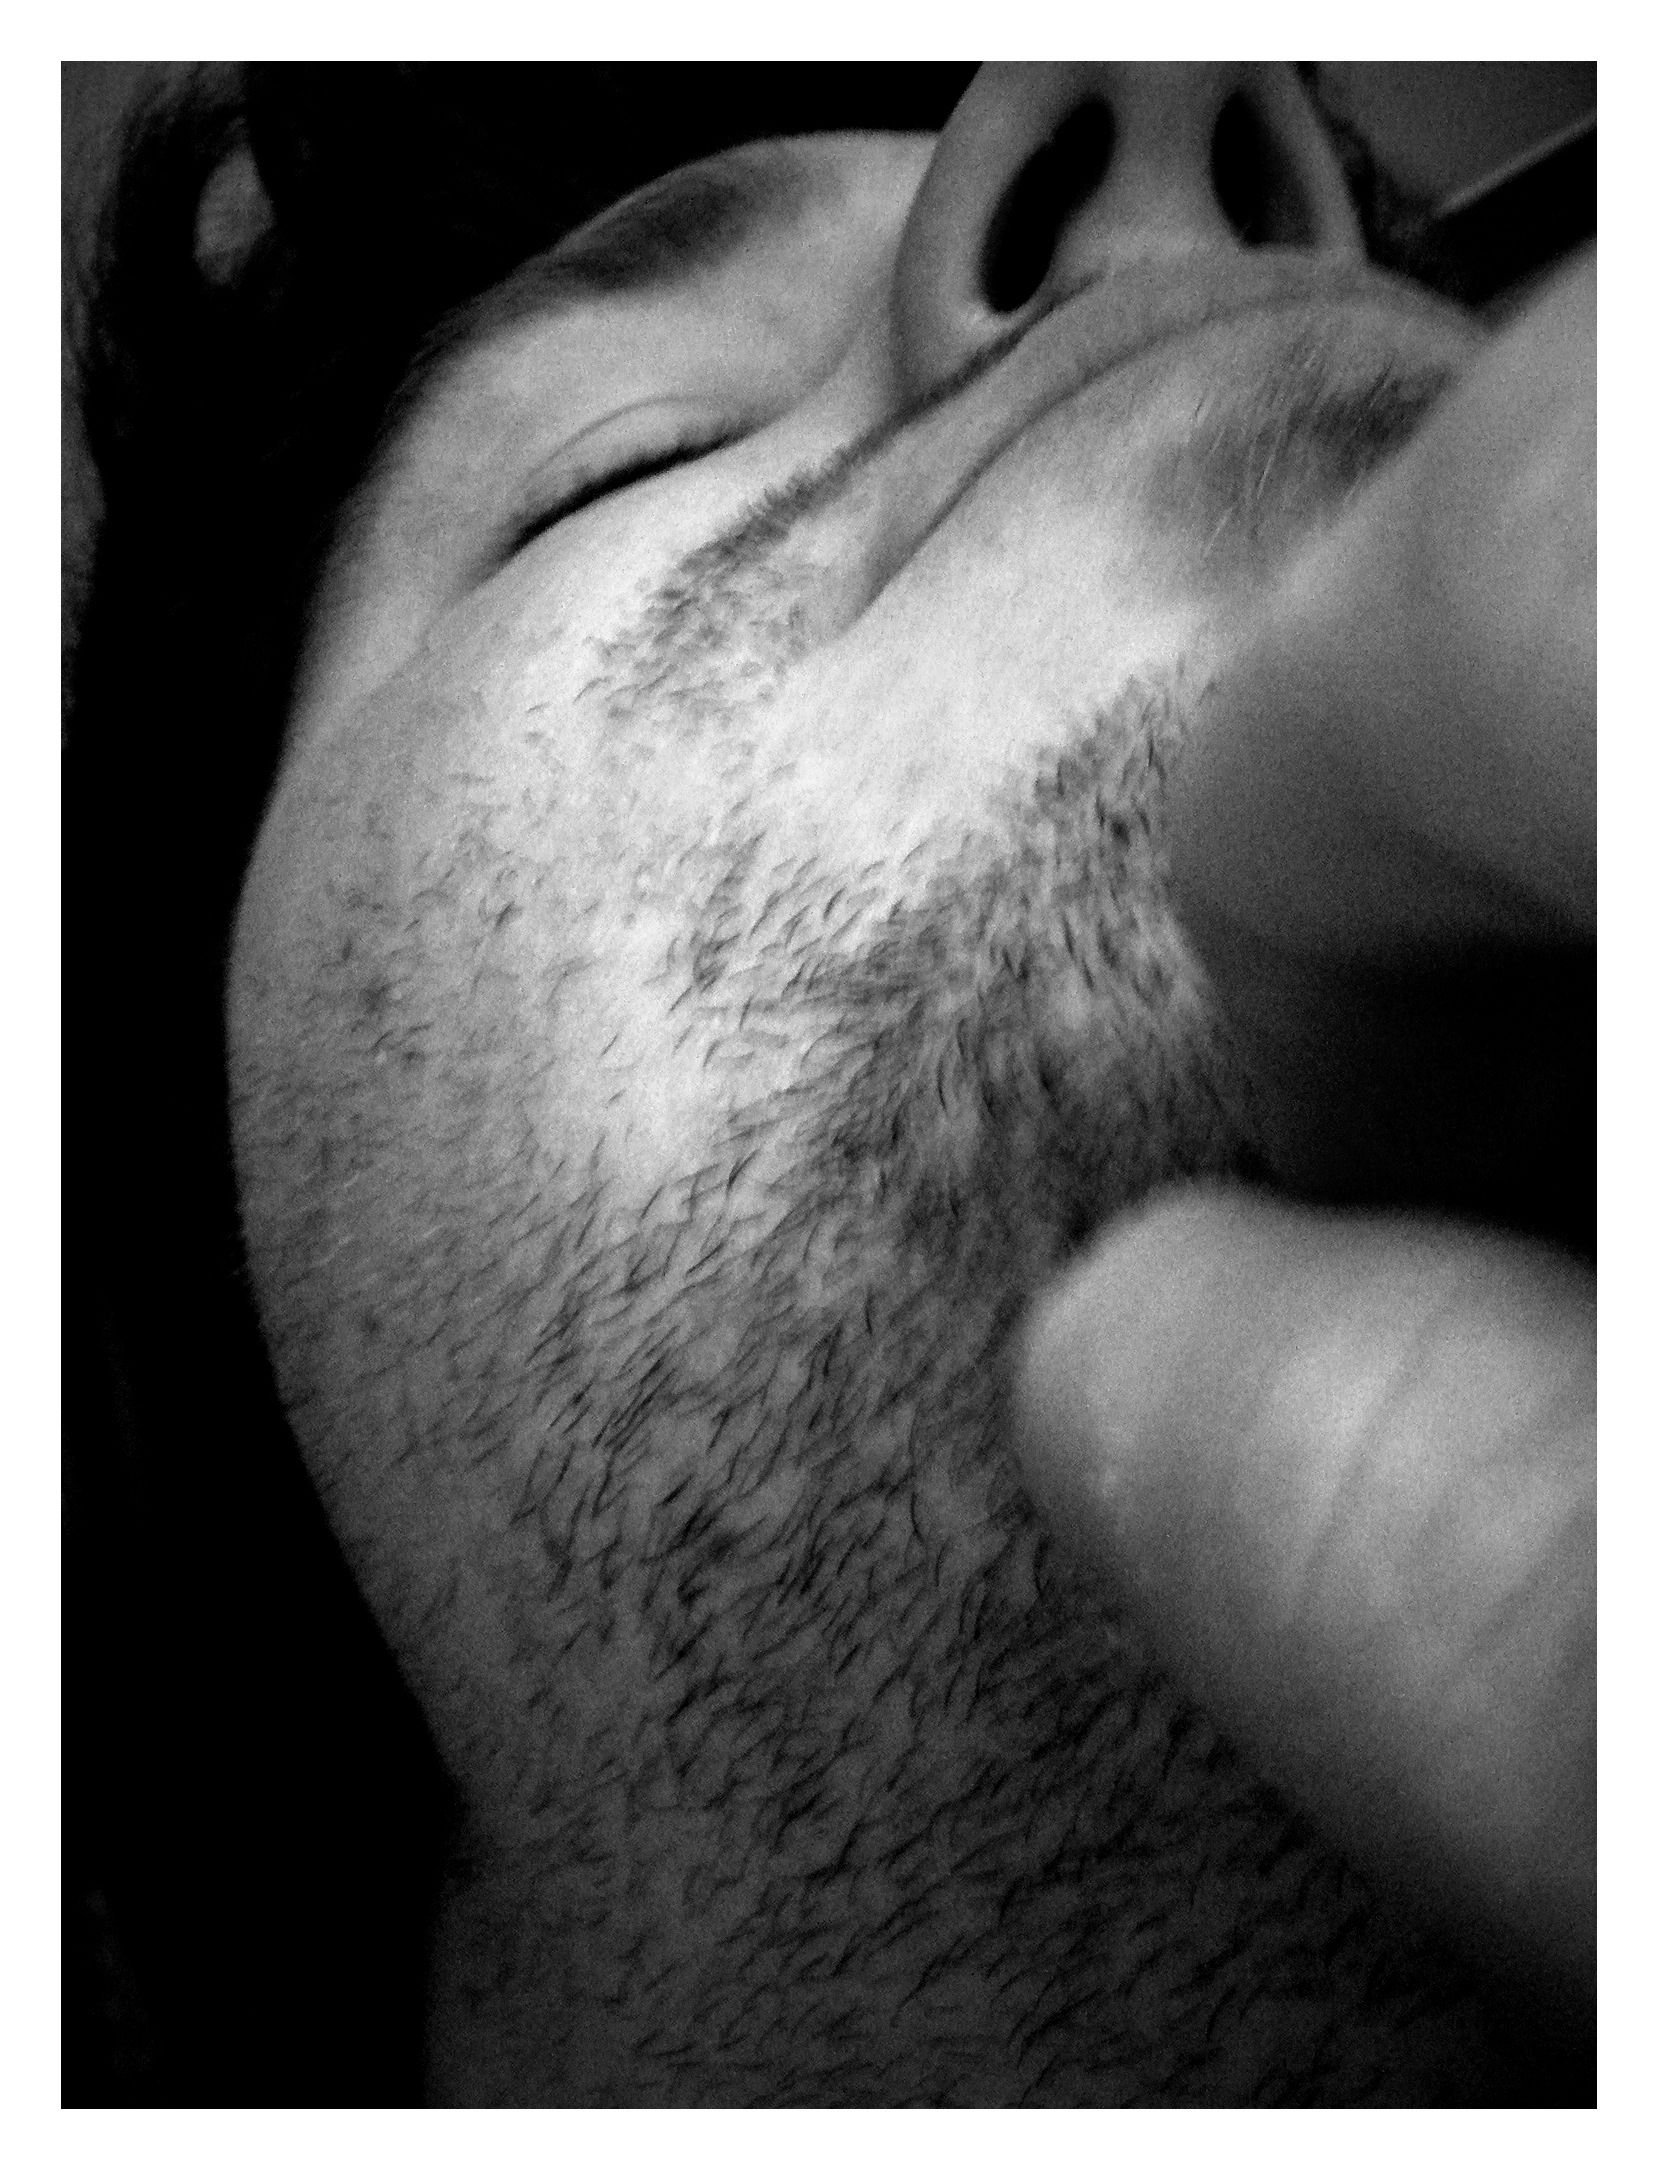 black and white pograph of a man shaving